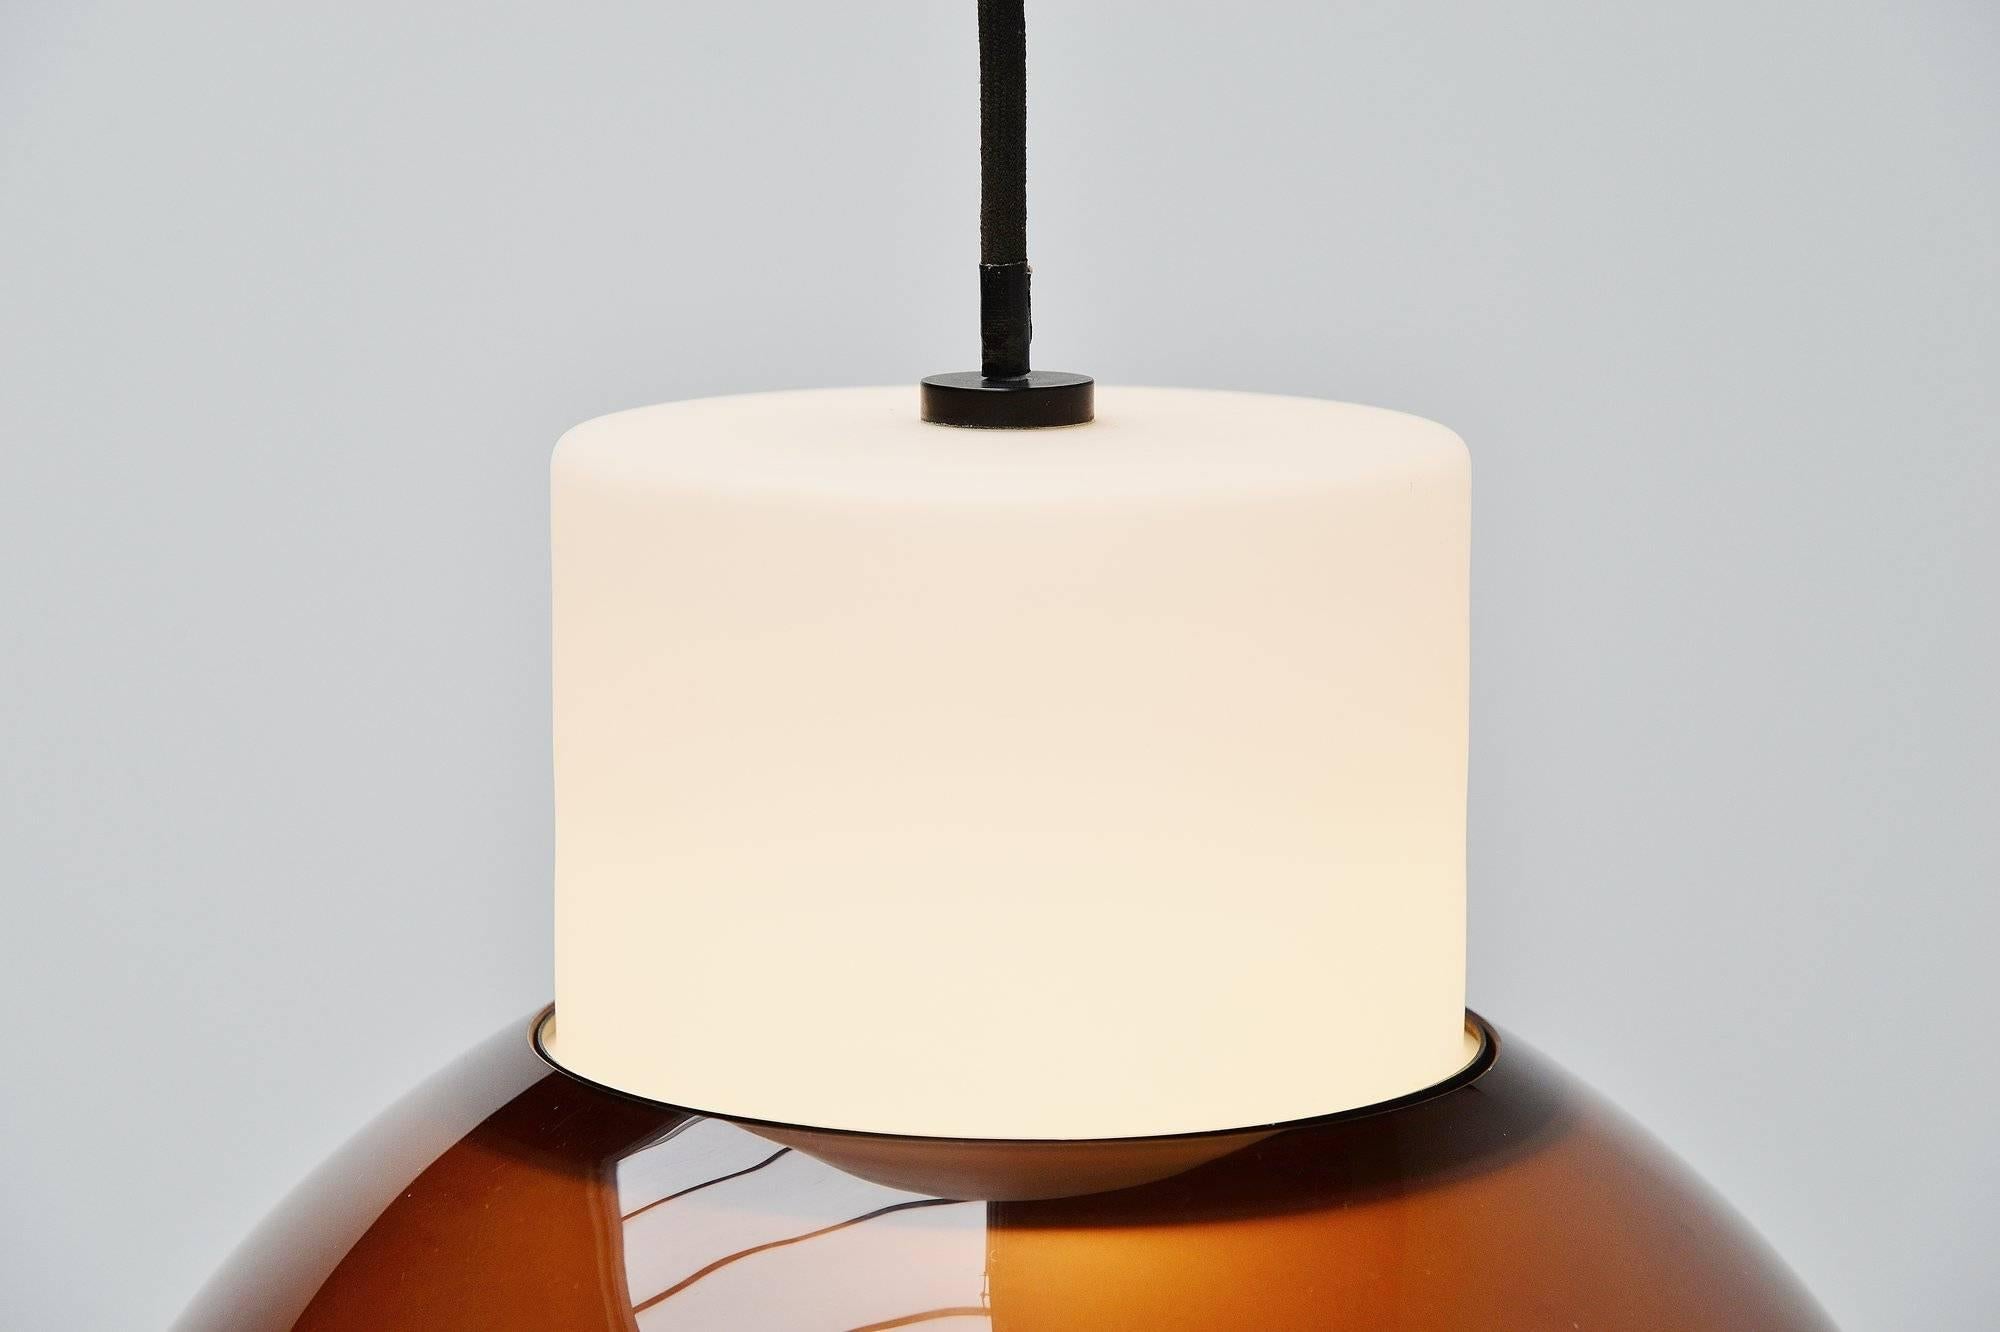 Nice pendant lamp model 2103 designed by Gino Sarfatti, manufactured by Arteluce, Italy, 1958. This light exists in three parts, a white opaline glass shade, a black lacquered aluminum ring and a smokey brown methacrylate shade. The lamp gives very